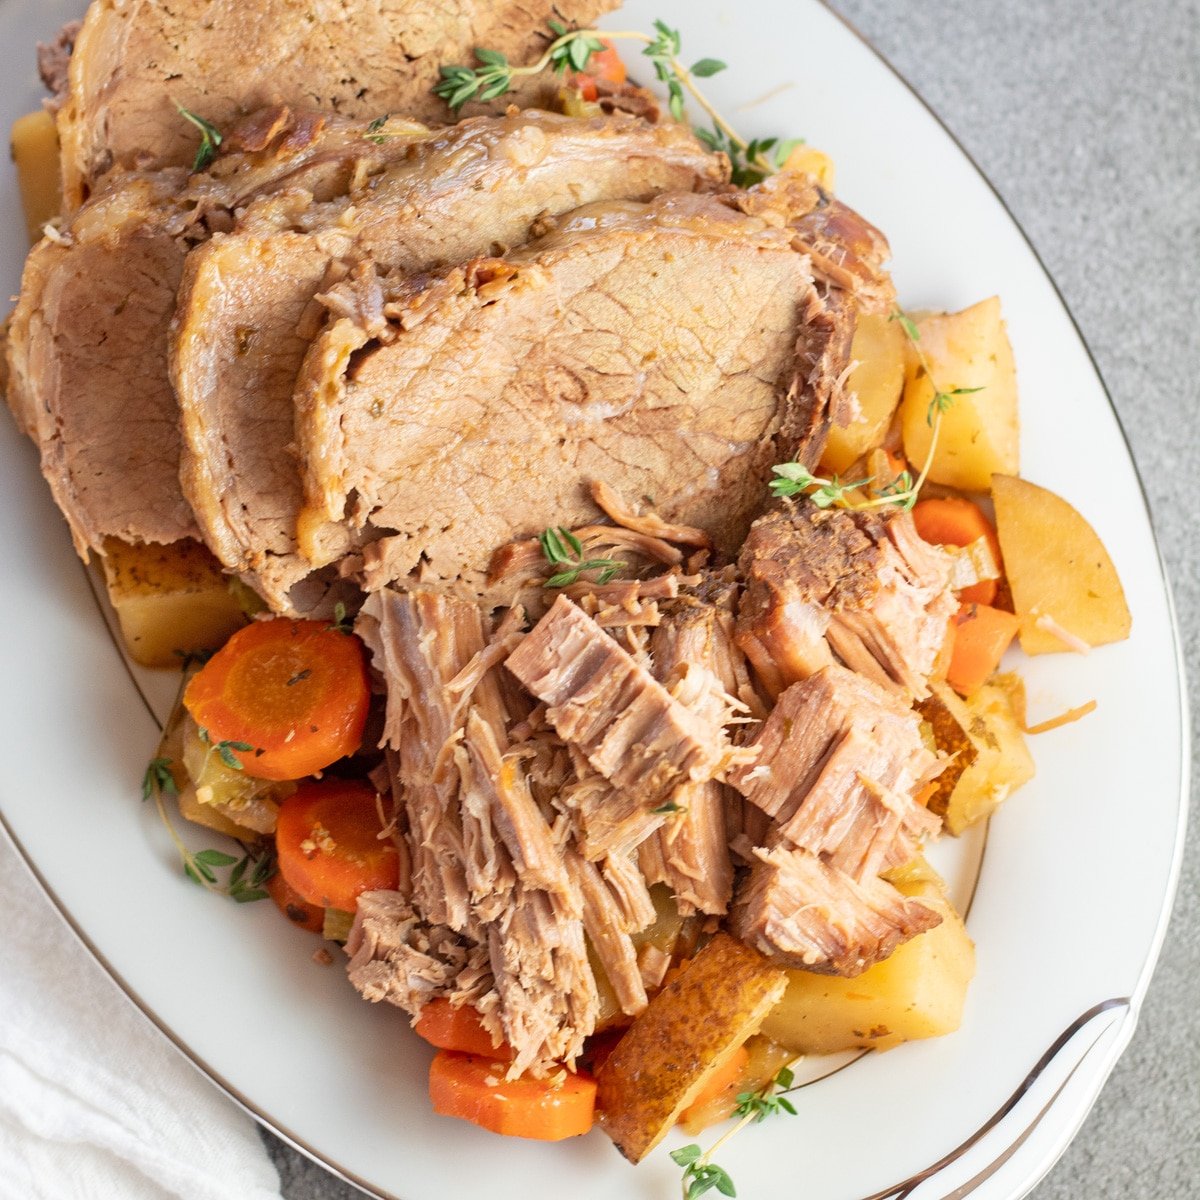 https://bakeitwithlove.com/wp-content/uploads/2022/03/slow-cooker-eye-of-round-roast-sq1.jpg